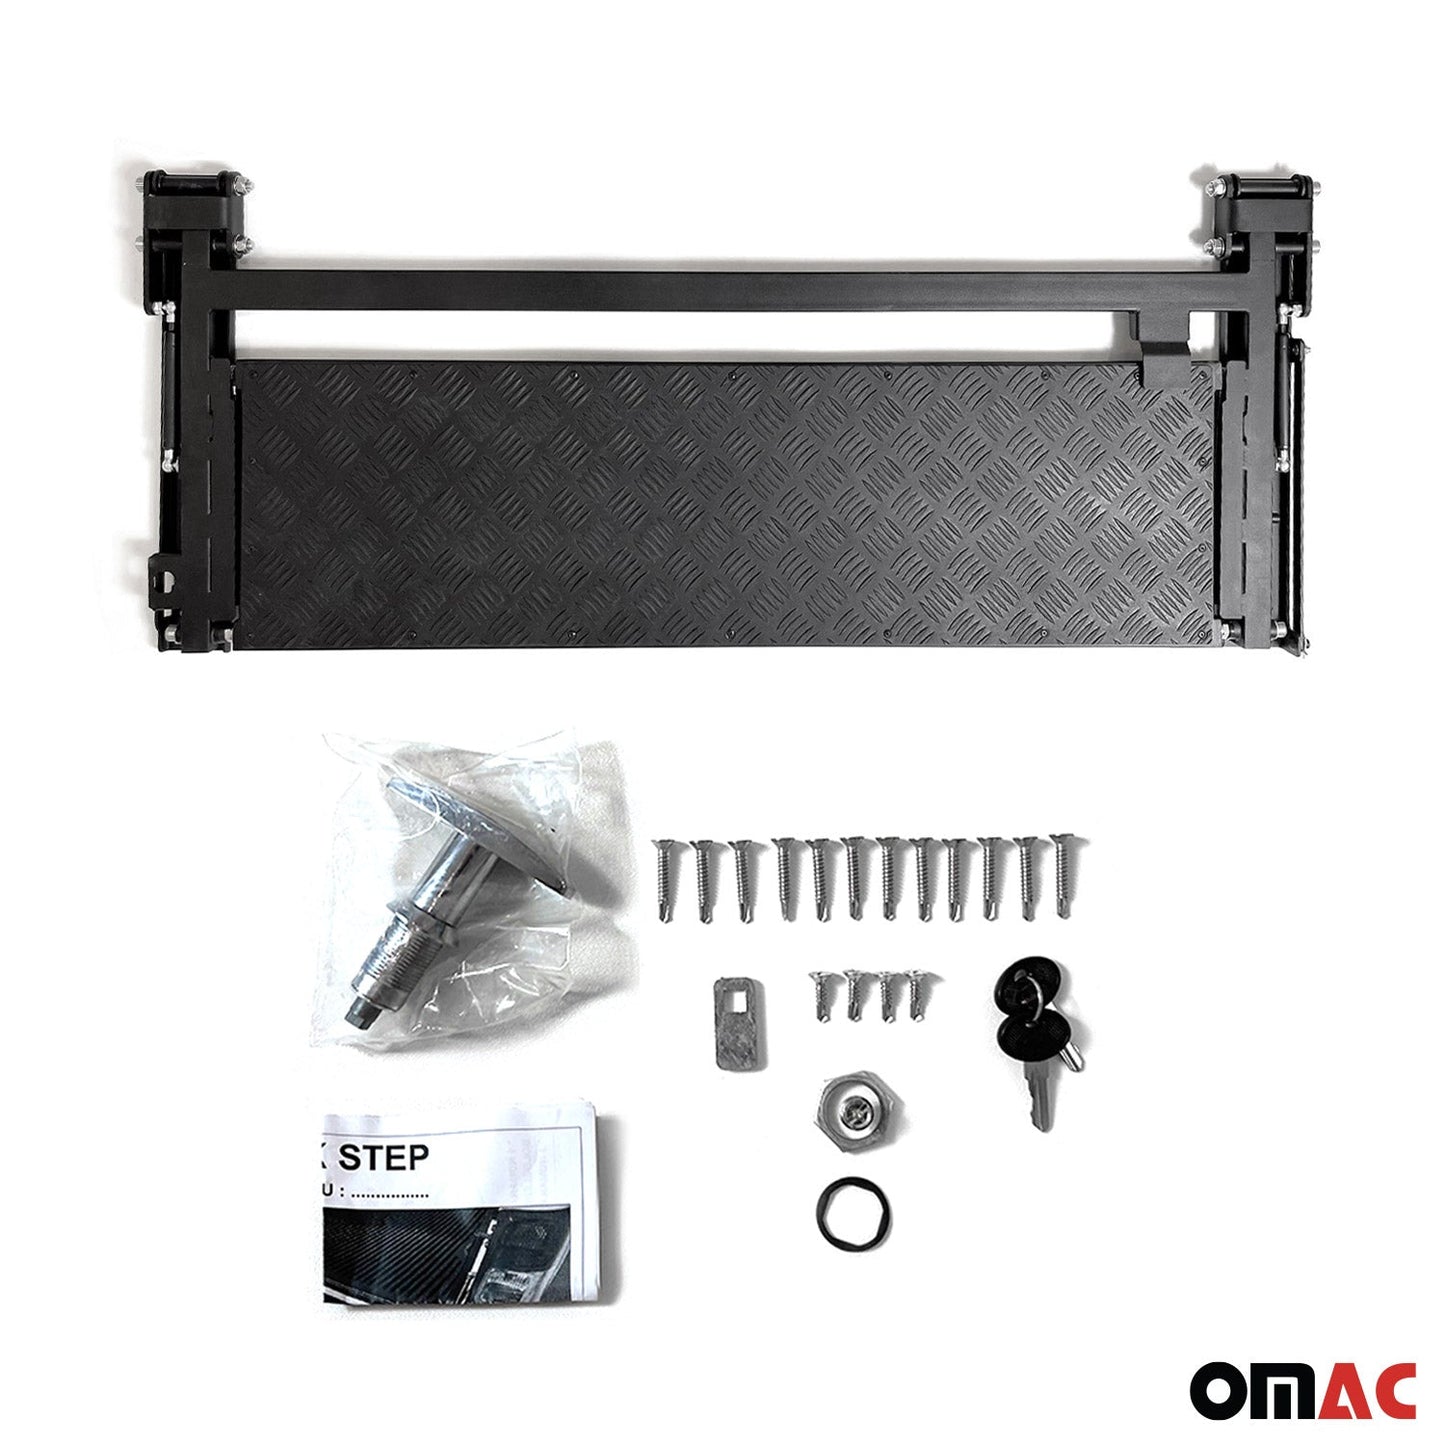 OMAC Foldable Tailgate Step for Pickup Adjustable Trunk Lid Truck Bed Step 96FTS001